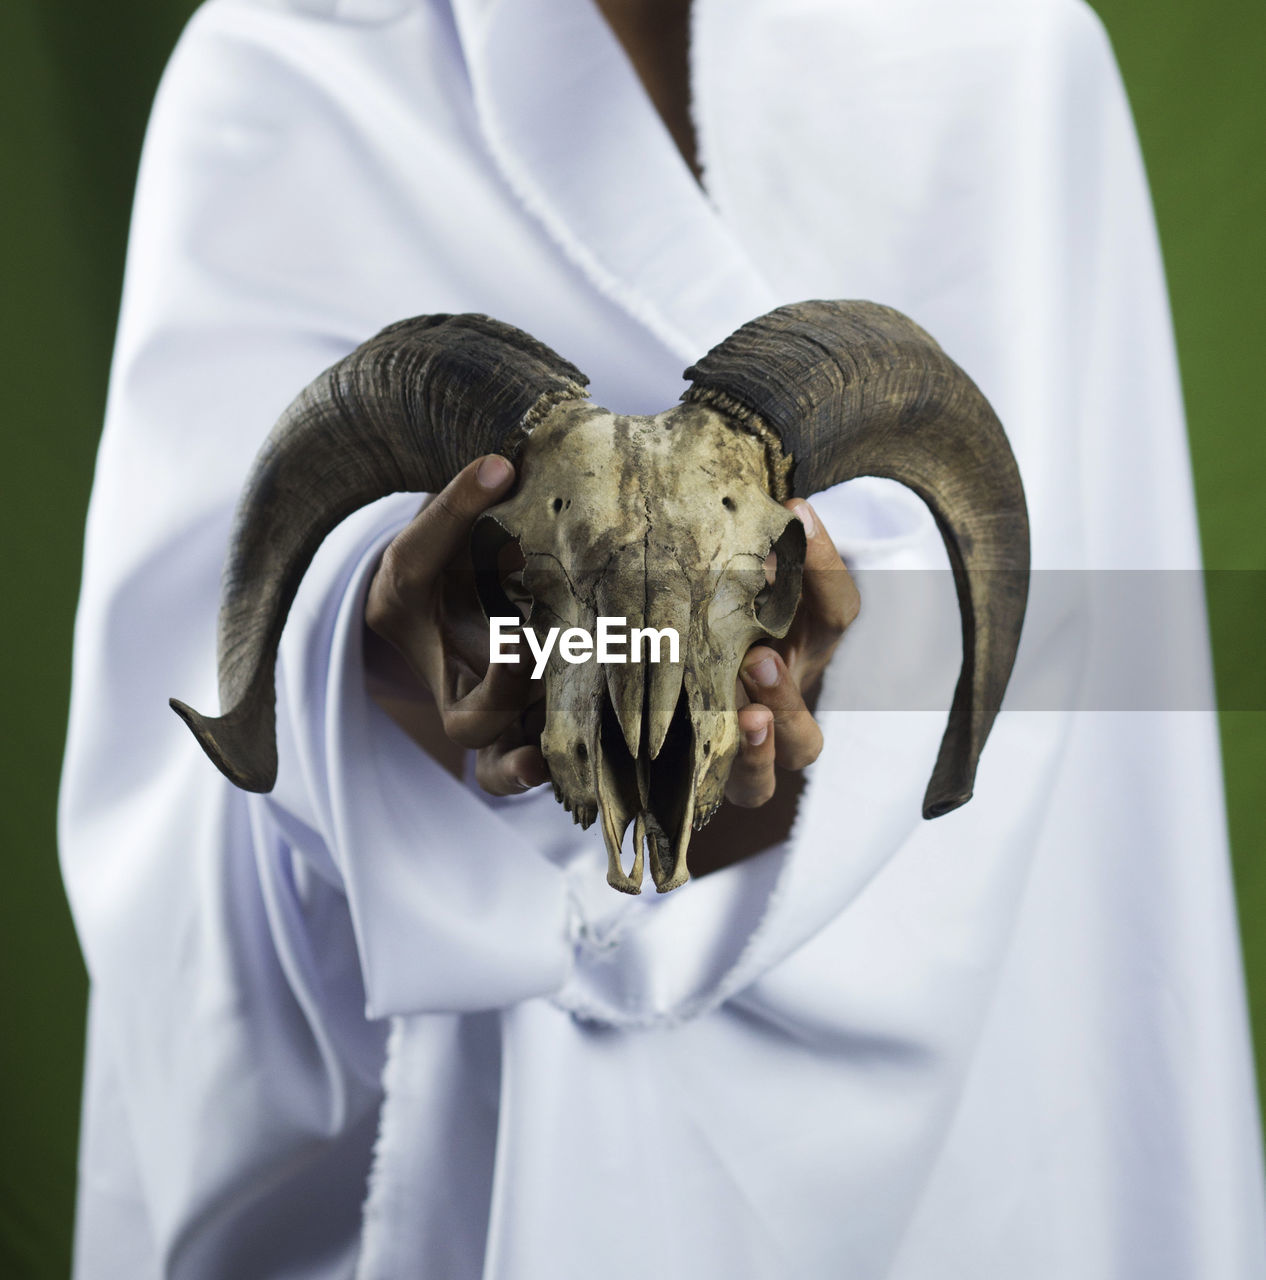 The sheep's skull is held by a mysterious white figure, it looks scary